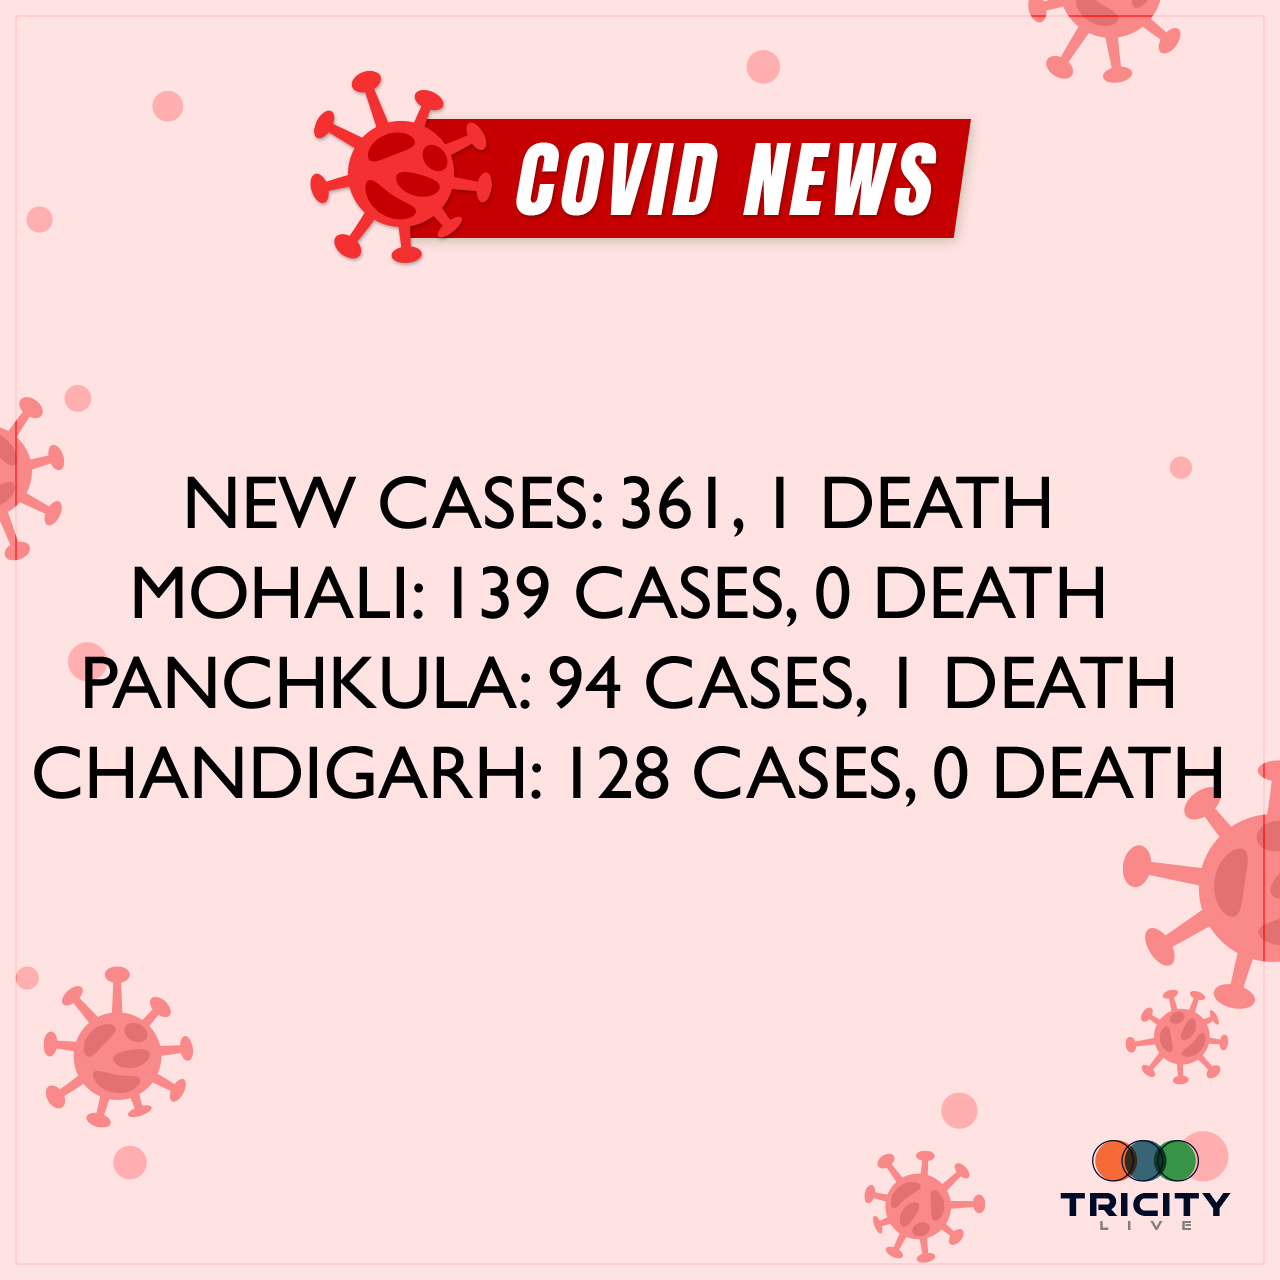 Alert: 1 death, 361 new infections reported in TRICITY due to coronavirus. Mohali at 139, 0 death , Panchkula at 94, 1 death and Chandigarh at 128